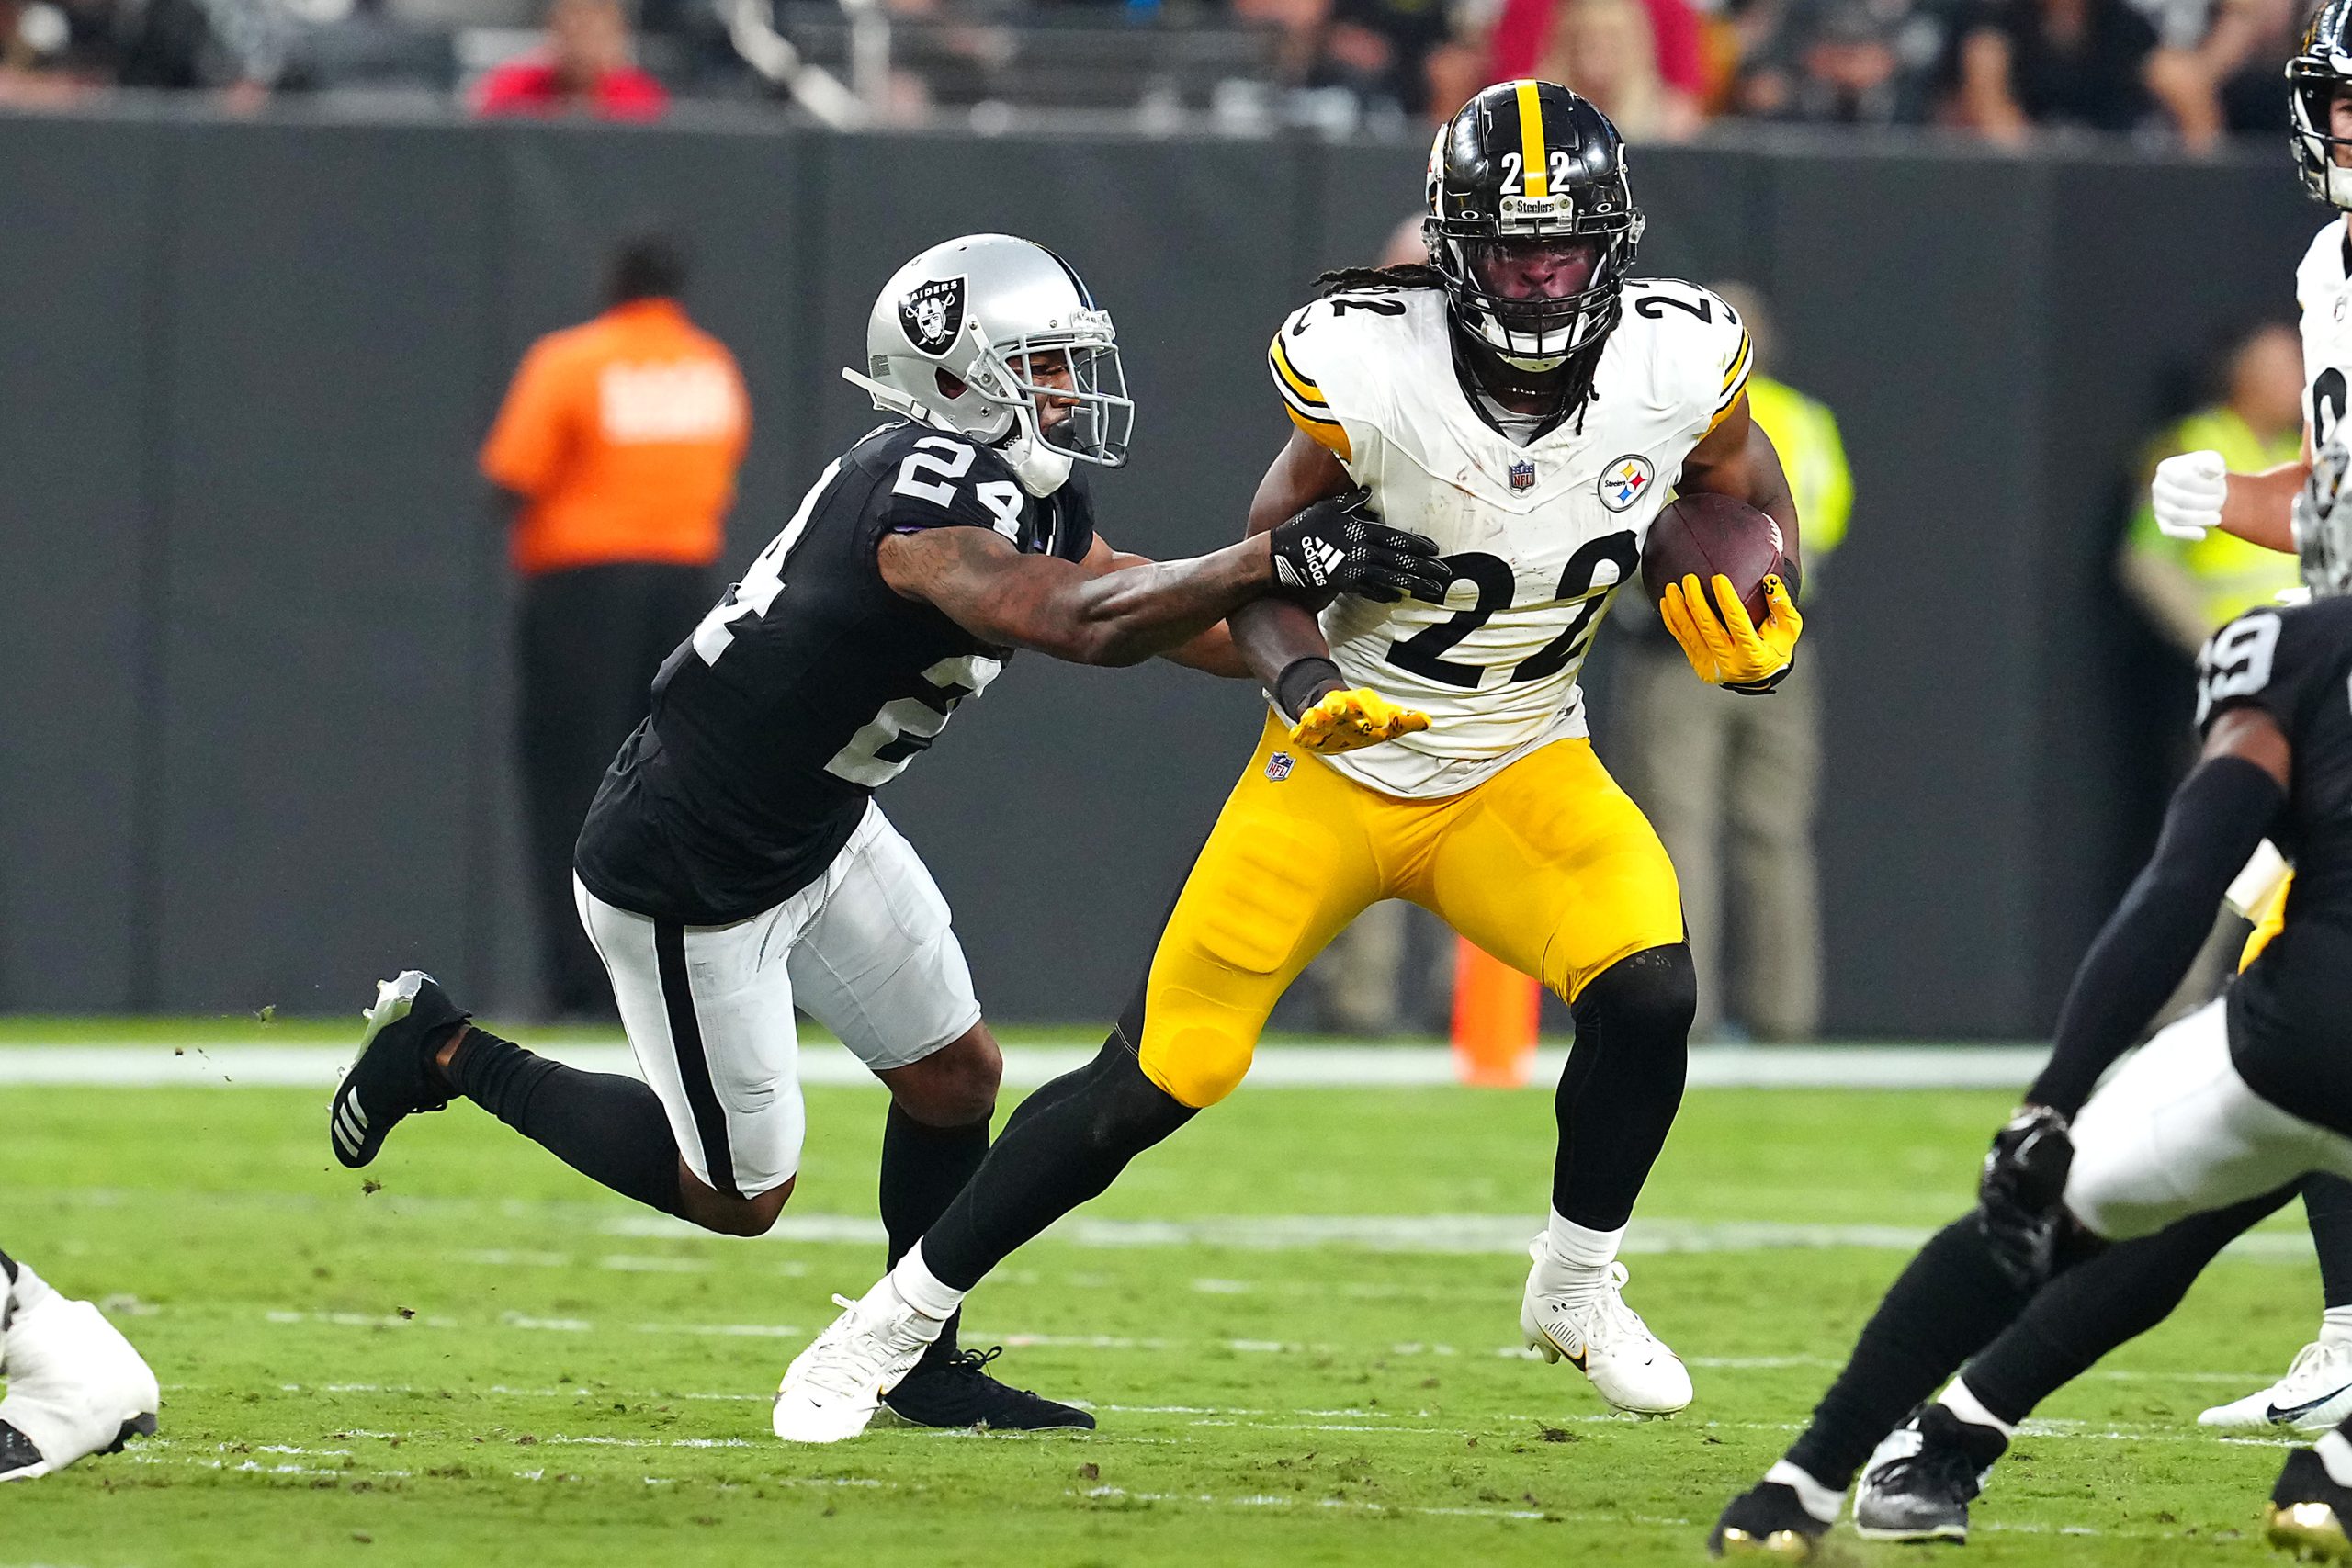 Analyzing the Steelers Week 3 win over the Raiders, by the numbers